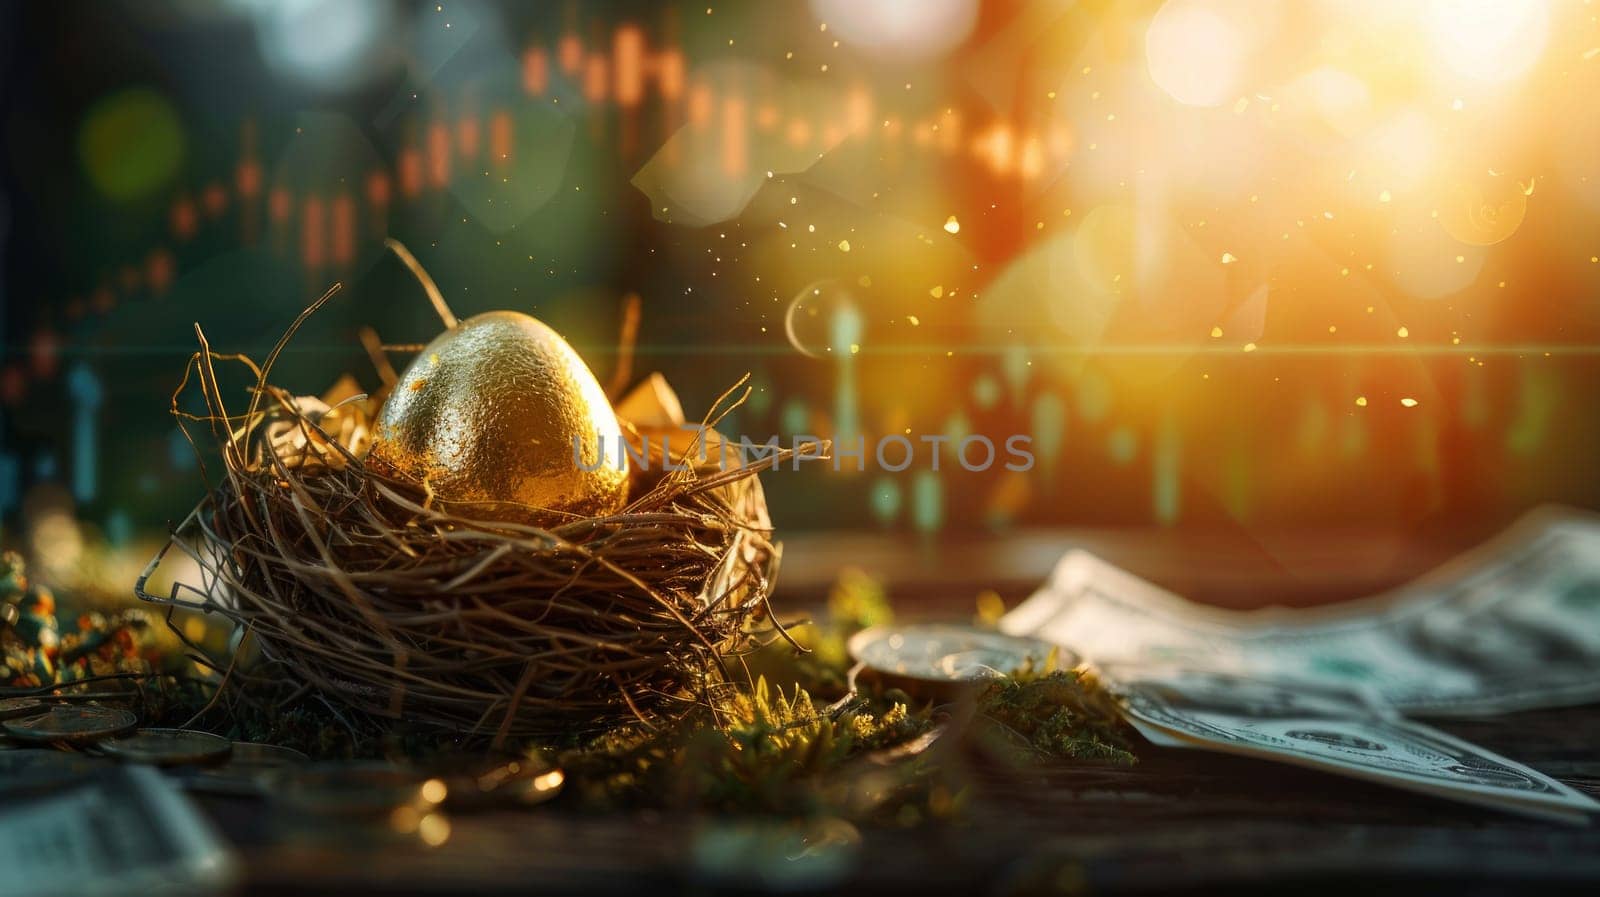 A nest with a golden egg in it sits on a wooden table. The table is covered with a stack of dollar bills